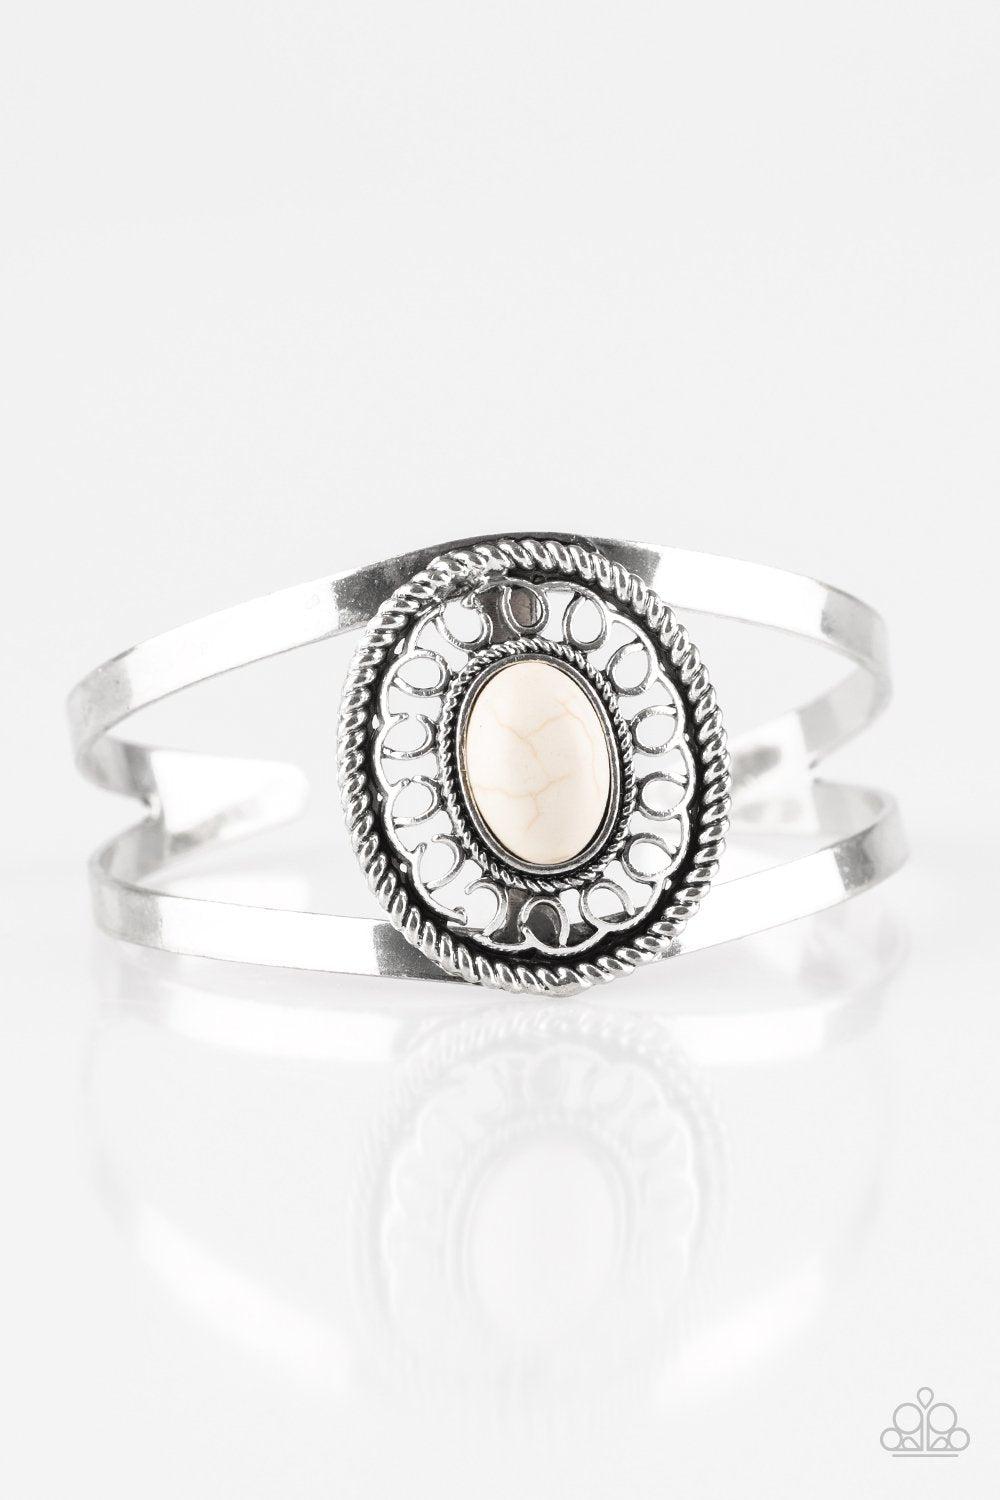 Deep In The Tumbleweeds White Stone Cuff Bracelet - Paparazzi Accessories- lightbox - CarasShop.com - $5 Jewelry by Cara Jewels